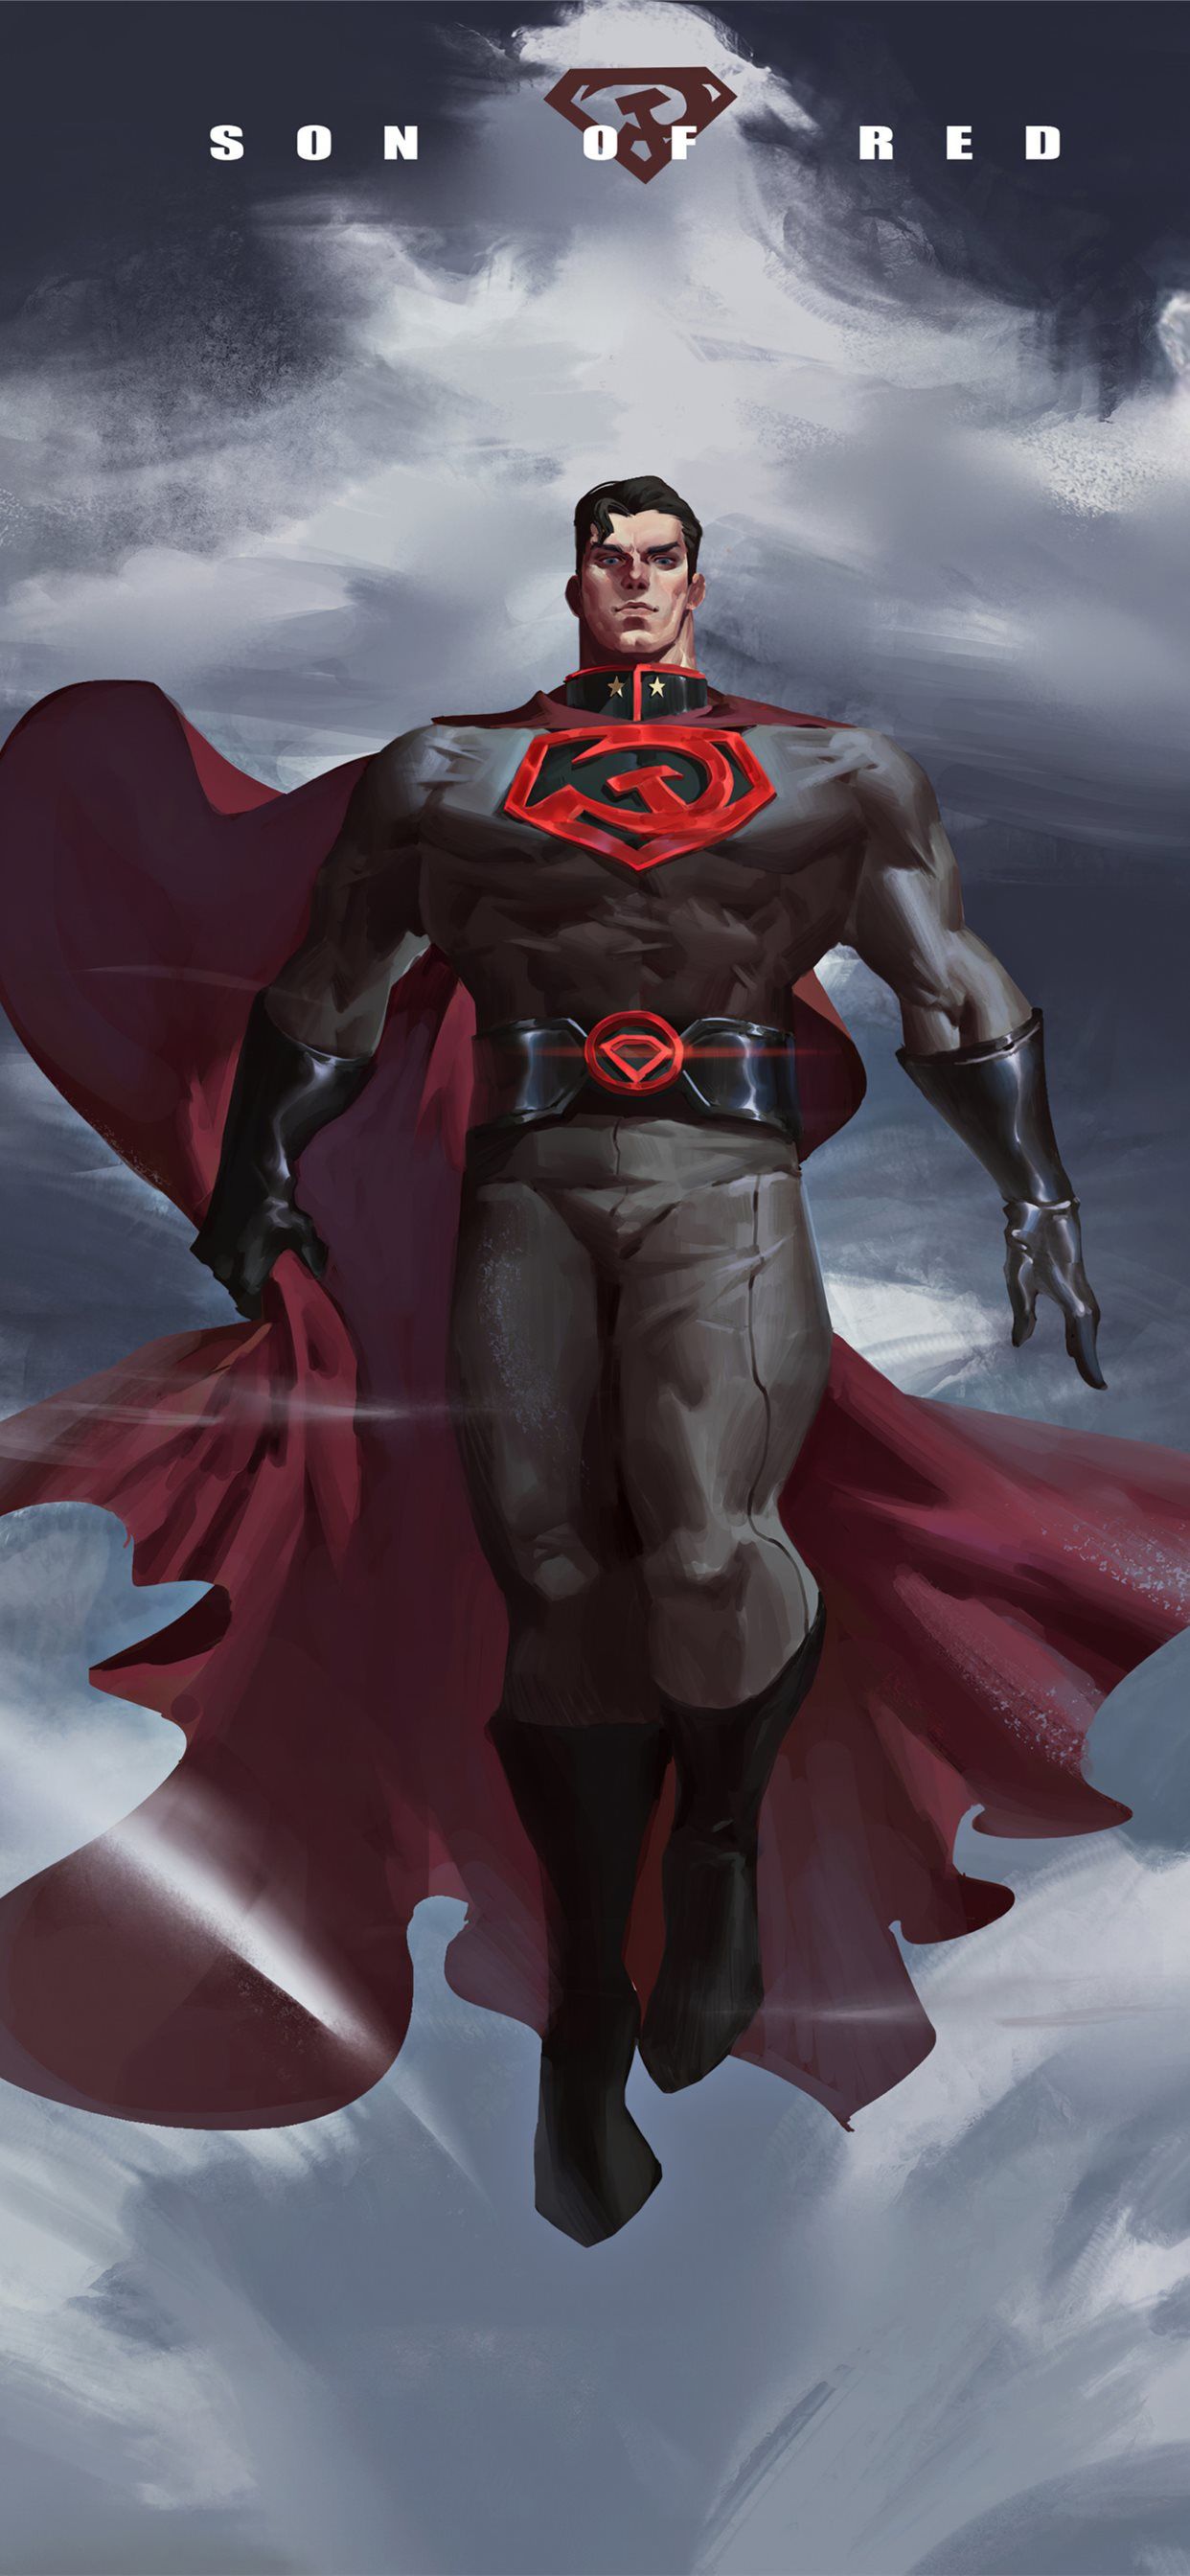 superman red son 2020 4k iPhone X Wallpaper Free Download